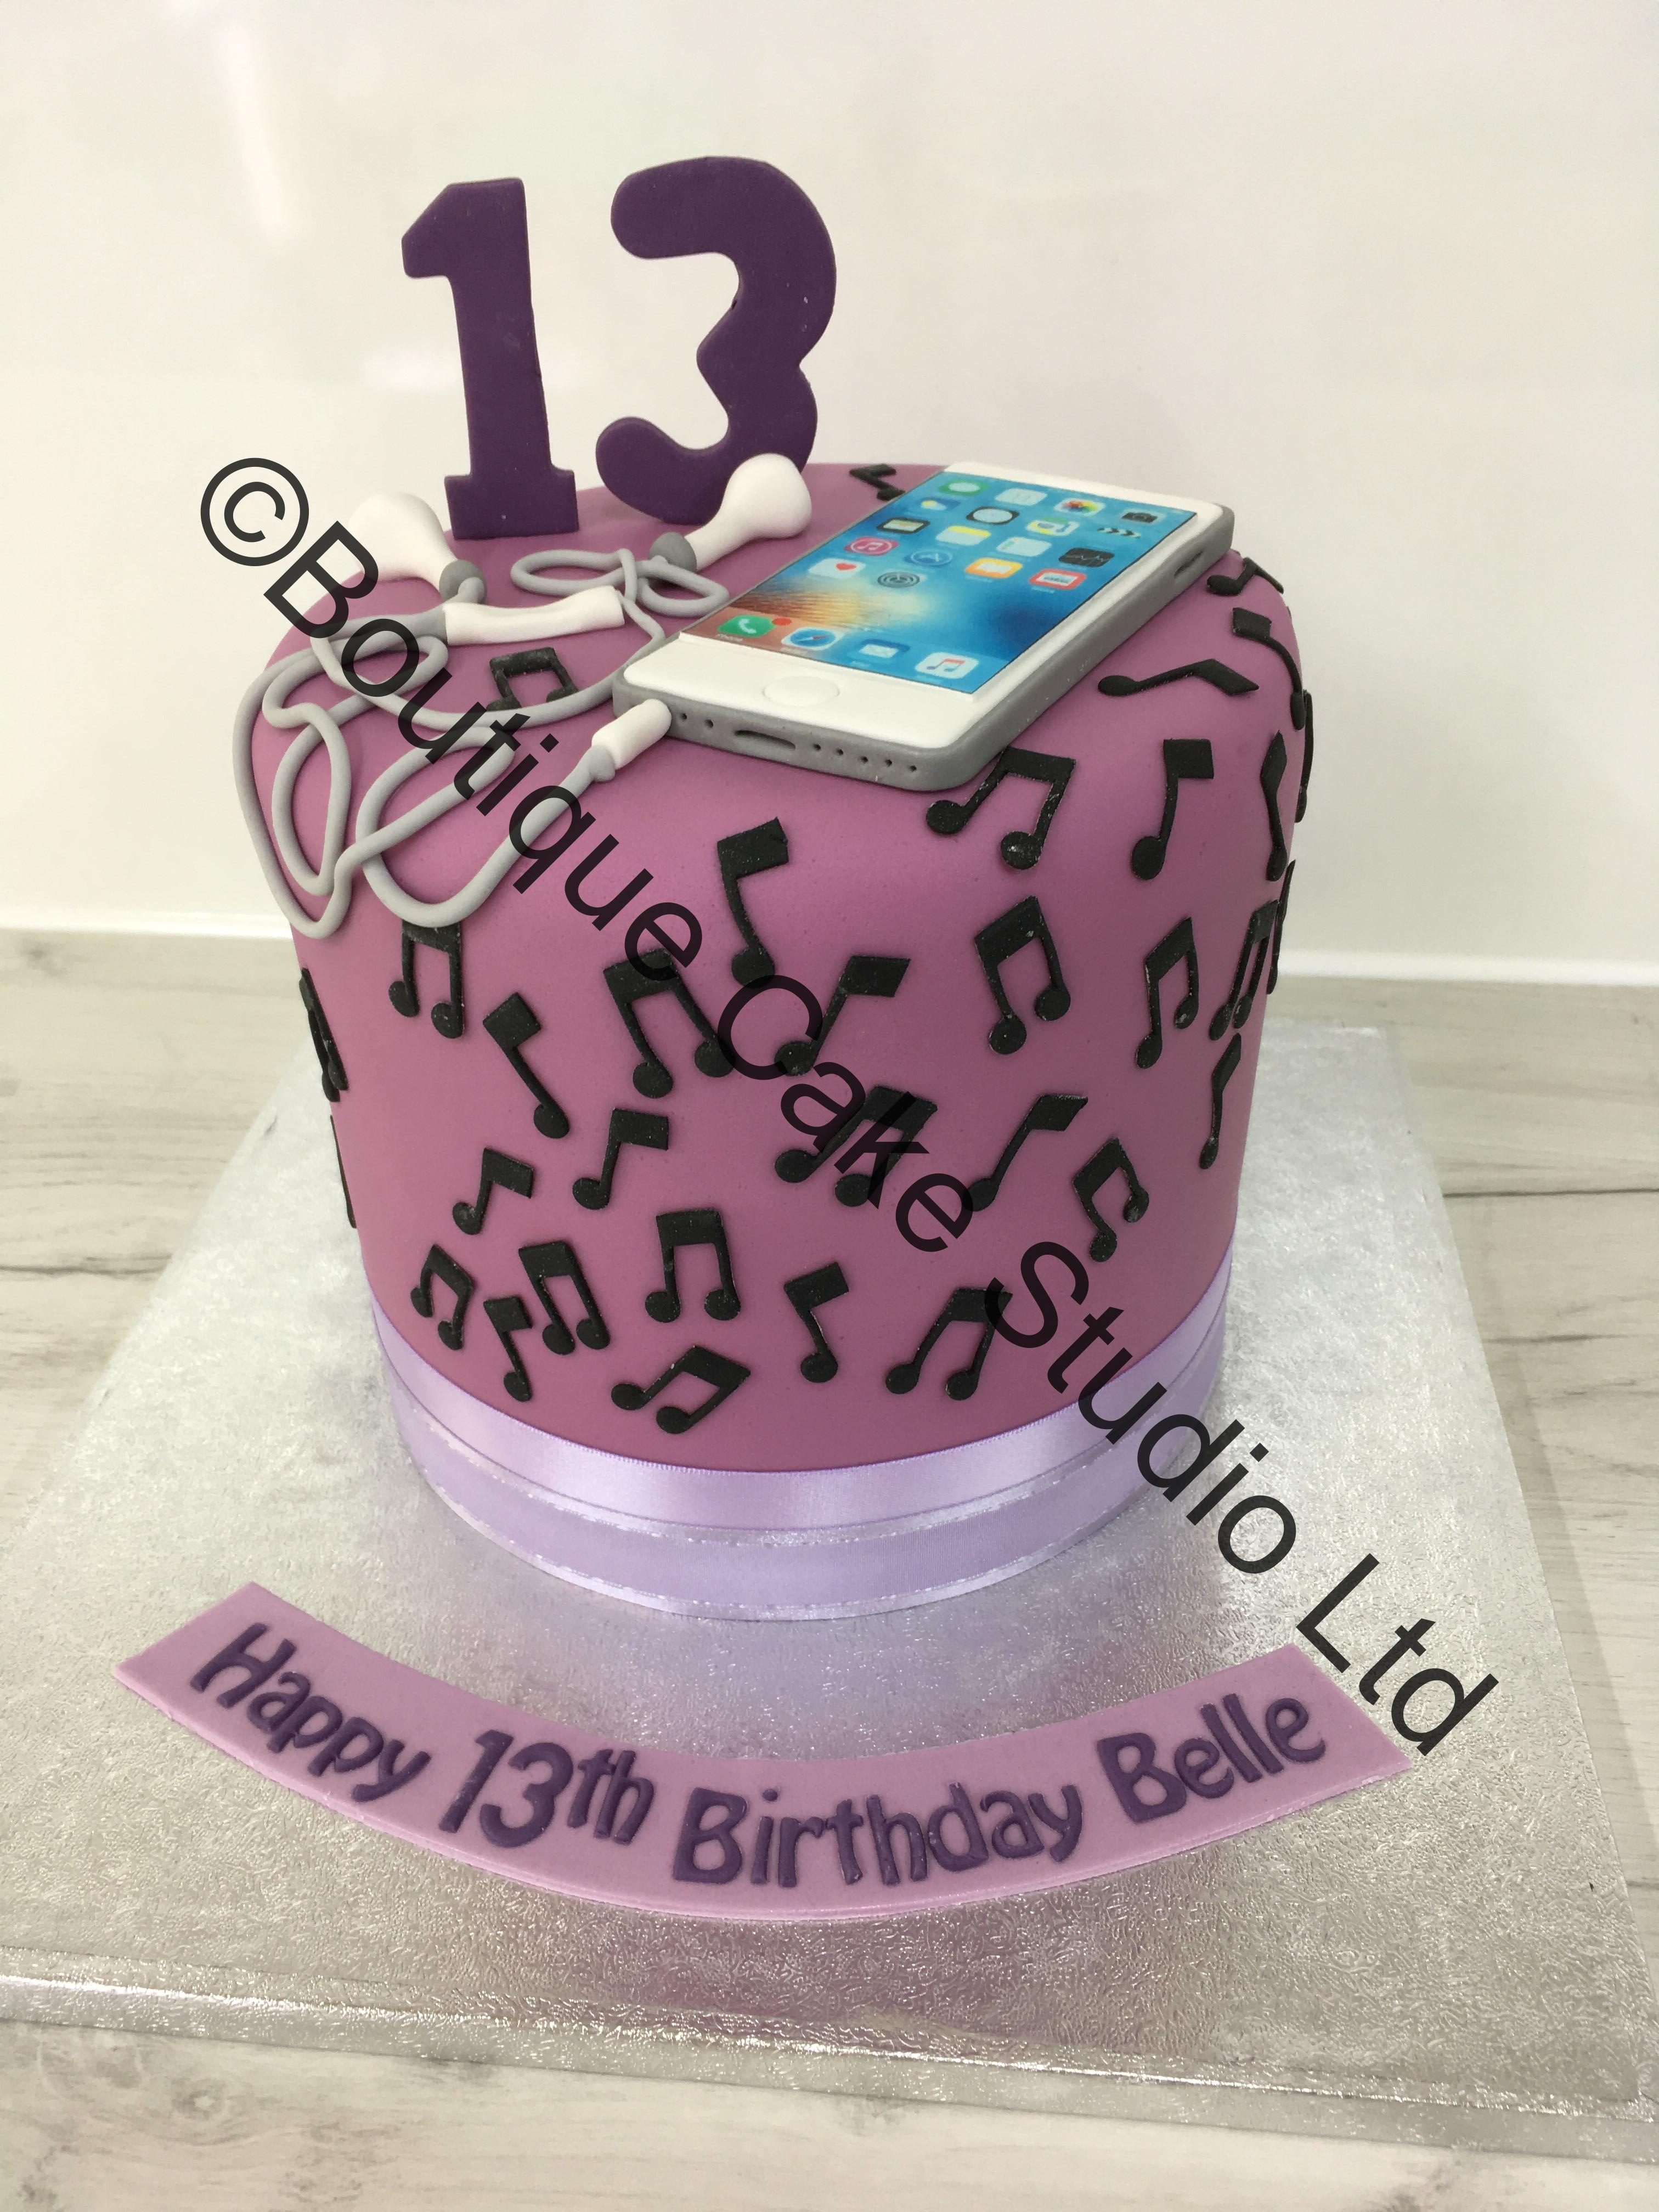 I Phone cake with sugar numbers and music